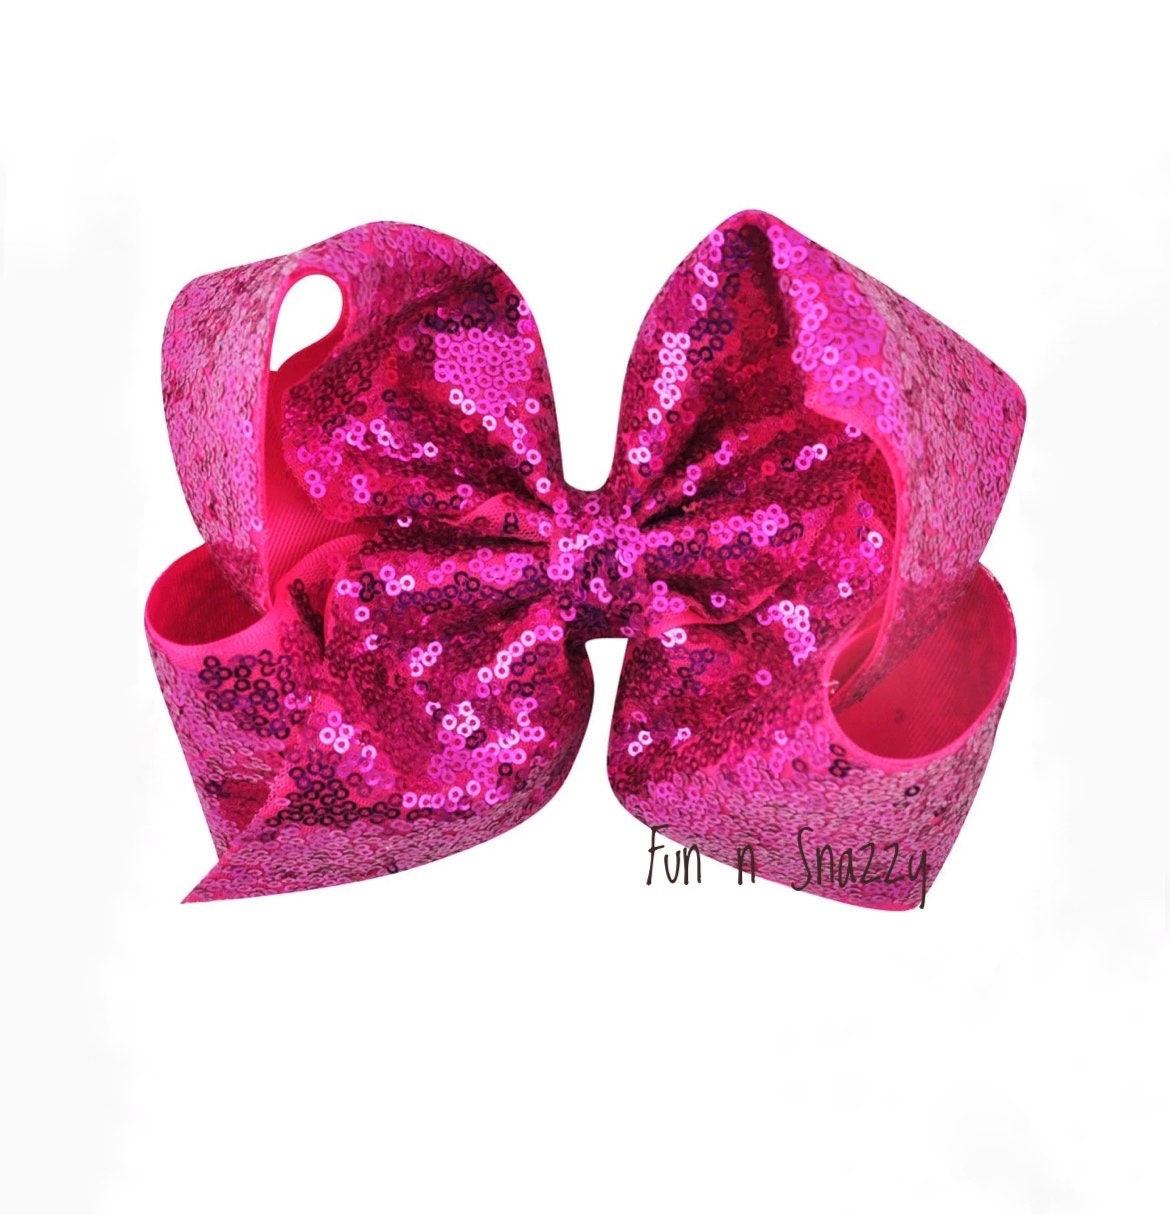 Large 5 inches polka dot sequin red bow,disney minnie sequin bows,Red  bows,Holiday bow diy Bows, Soft Bows, Wholesale Bows/ NO CLIPS